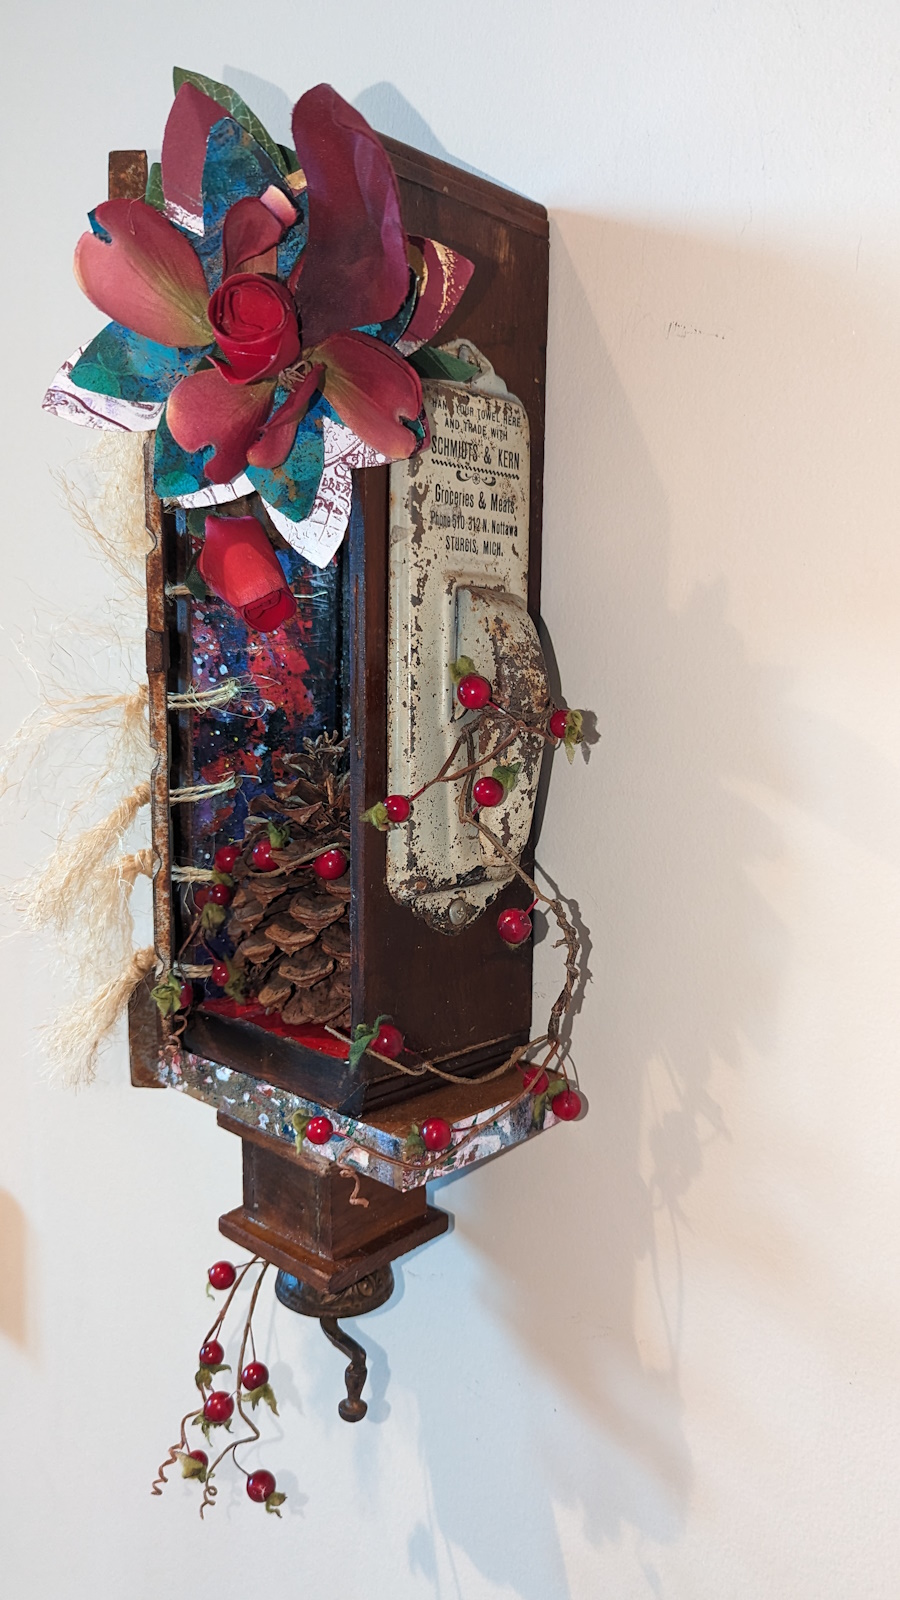 This is a 3D assemblage sculpture made from a small box that's filled with monoprint flowers, a pinecone, and vintage items.